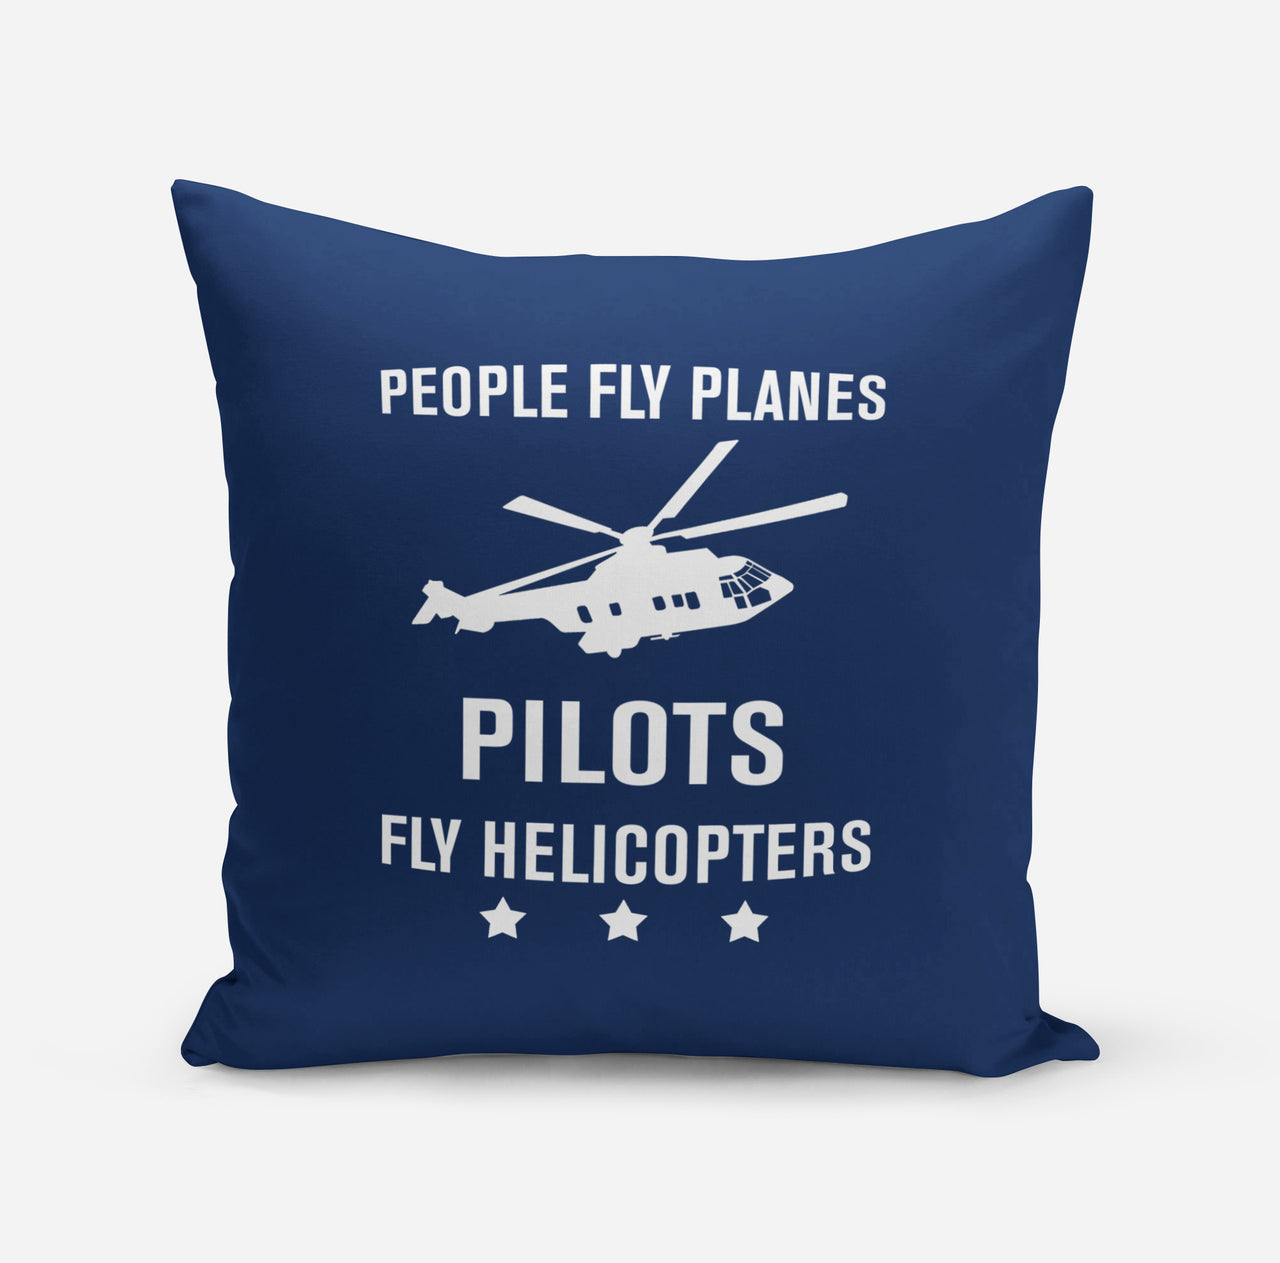 People Fly Planes Pilots Fly Helicopters Designed Pillows